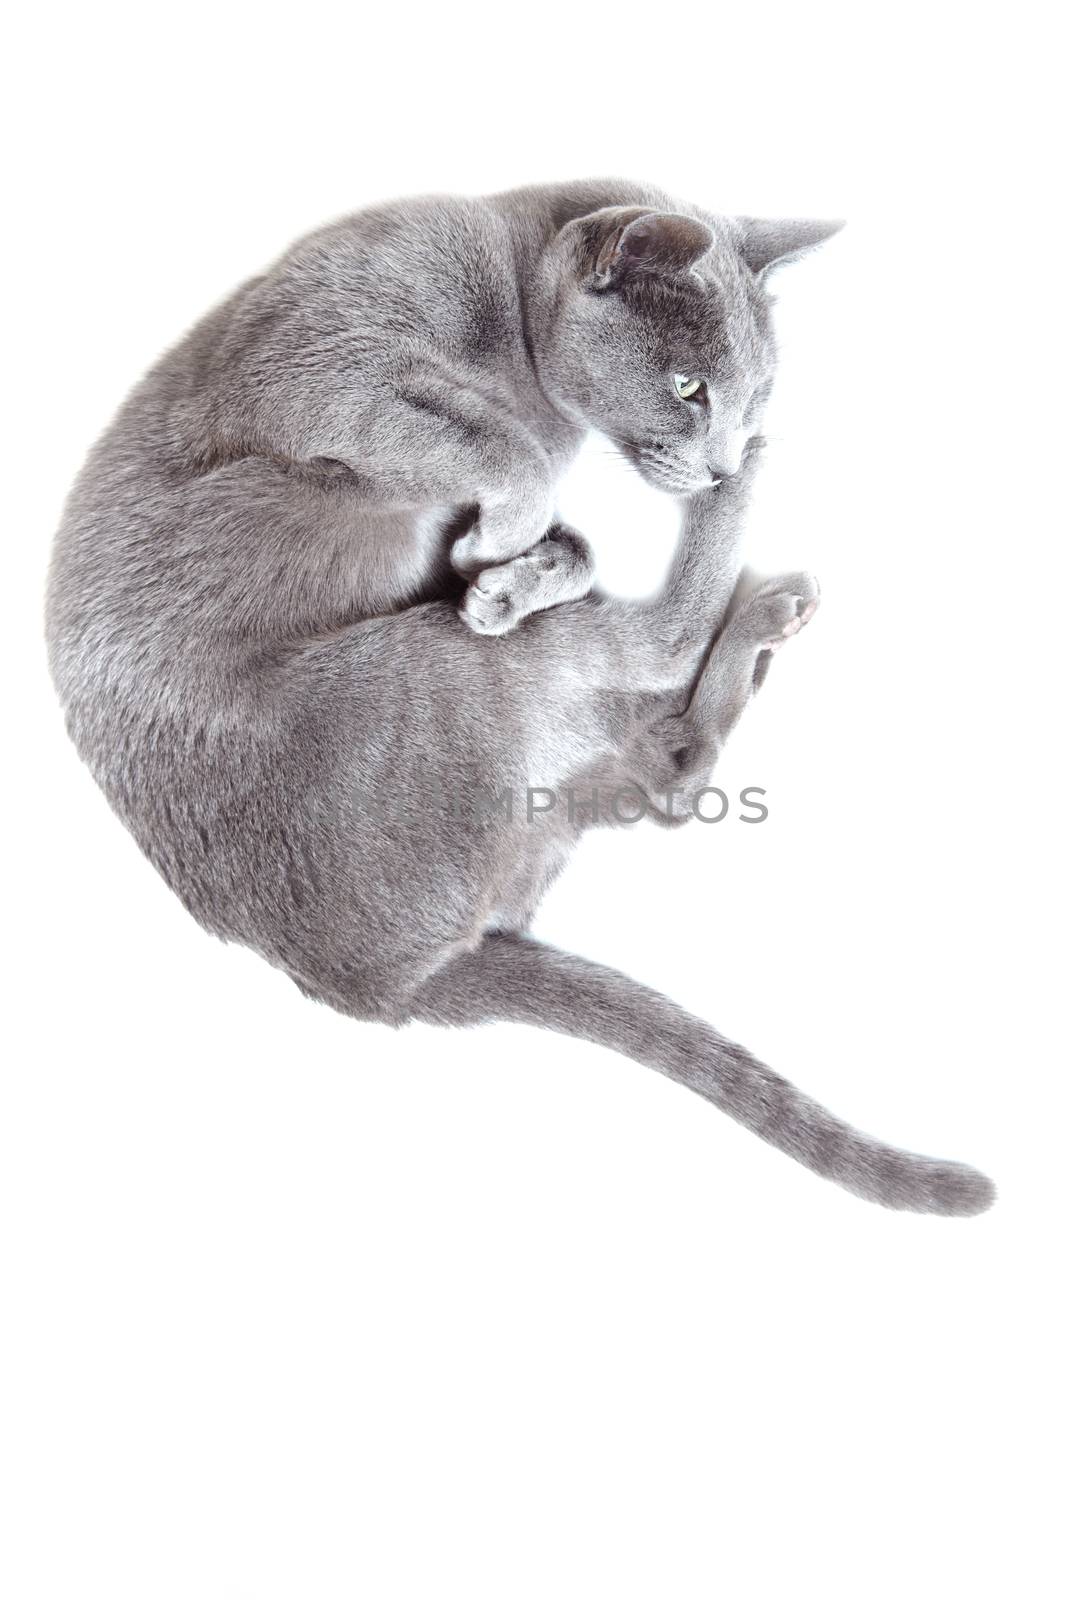 Gray cat laying on a white background